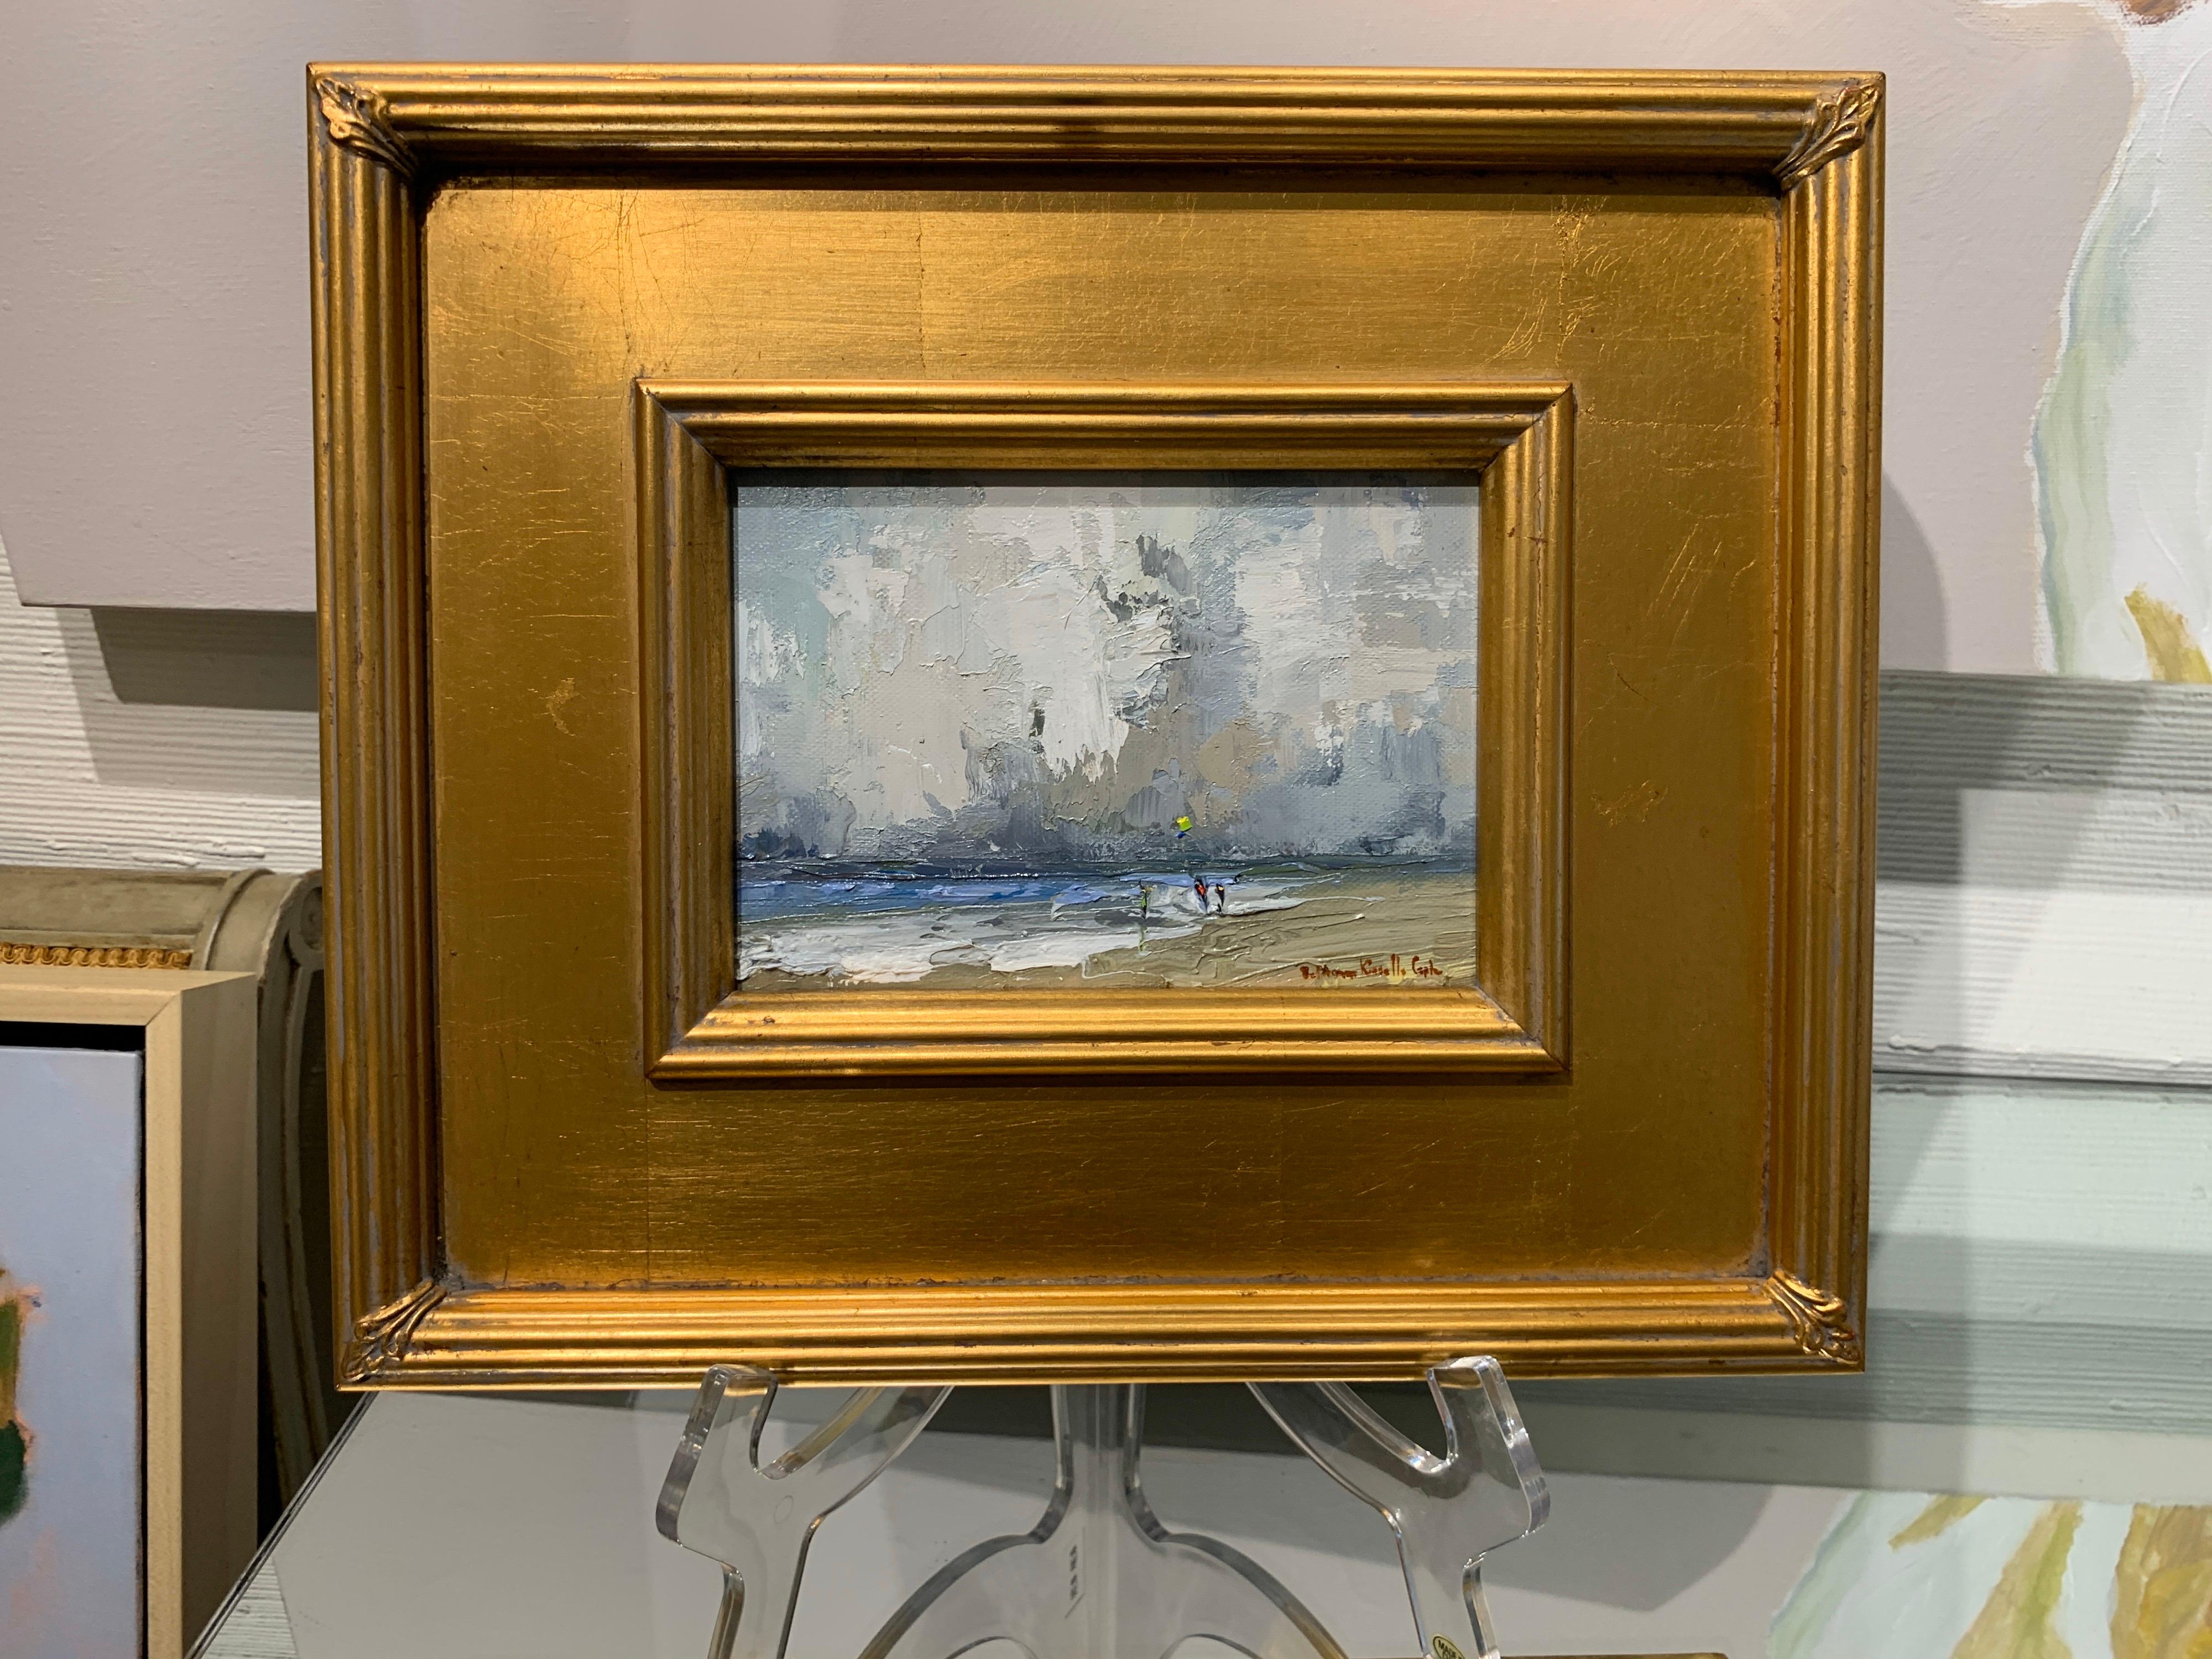 'Where the Sun Forgets the Day' is a petite framed Impressionist oil on board beach painting created by American artist Bethanne Kinsella Cople in 2019. Featuring a subtle palette, mostly made of blue and brown tones, delicately highlighted by